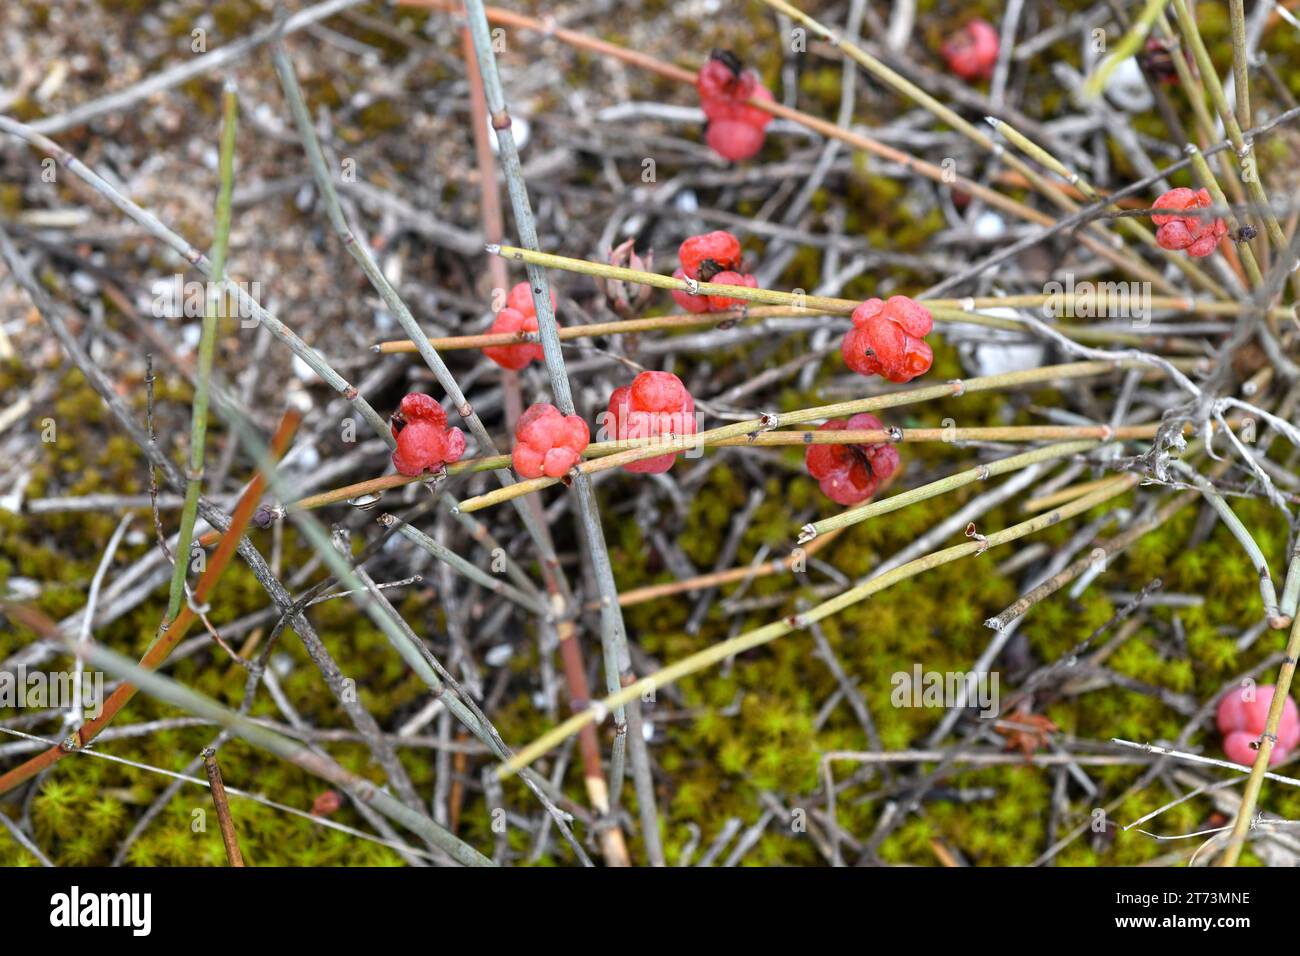 Belcho, trompera or uva de mar (Ephedra distachya) is a prostrate medicinal shrub native to central and southern Europe and Asia. Contains the alkaloi Stock Photo